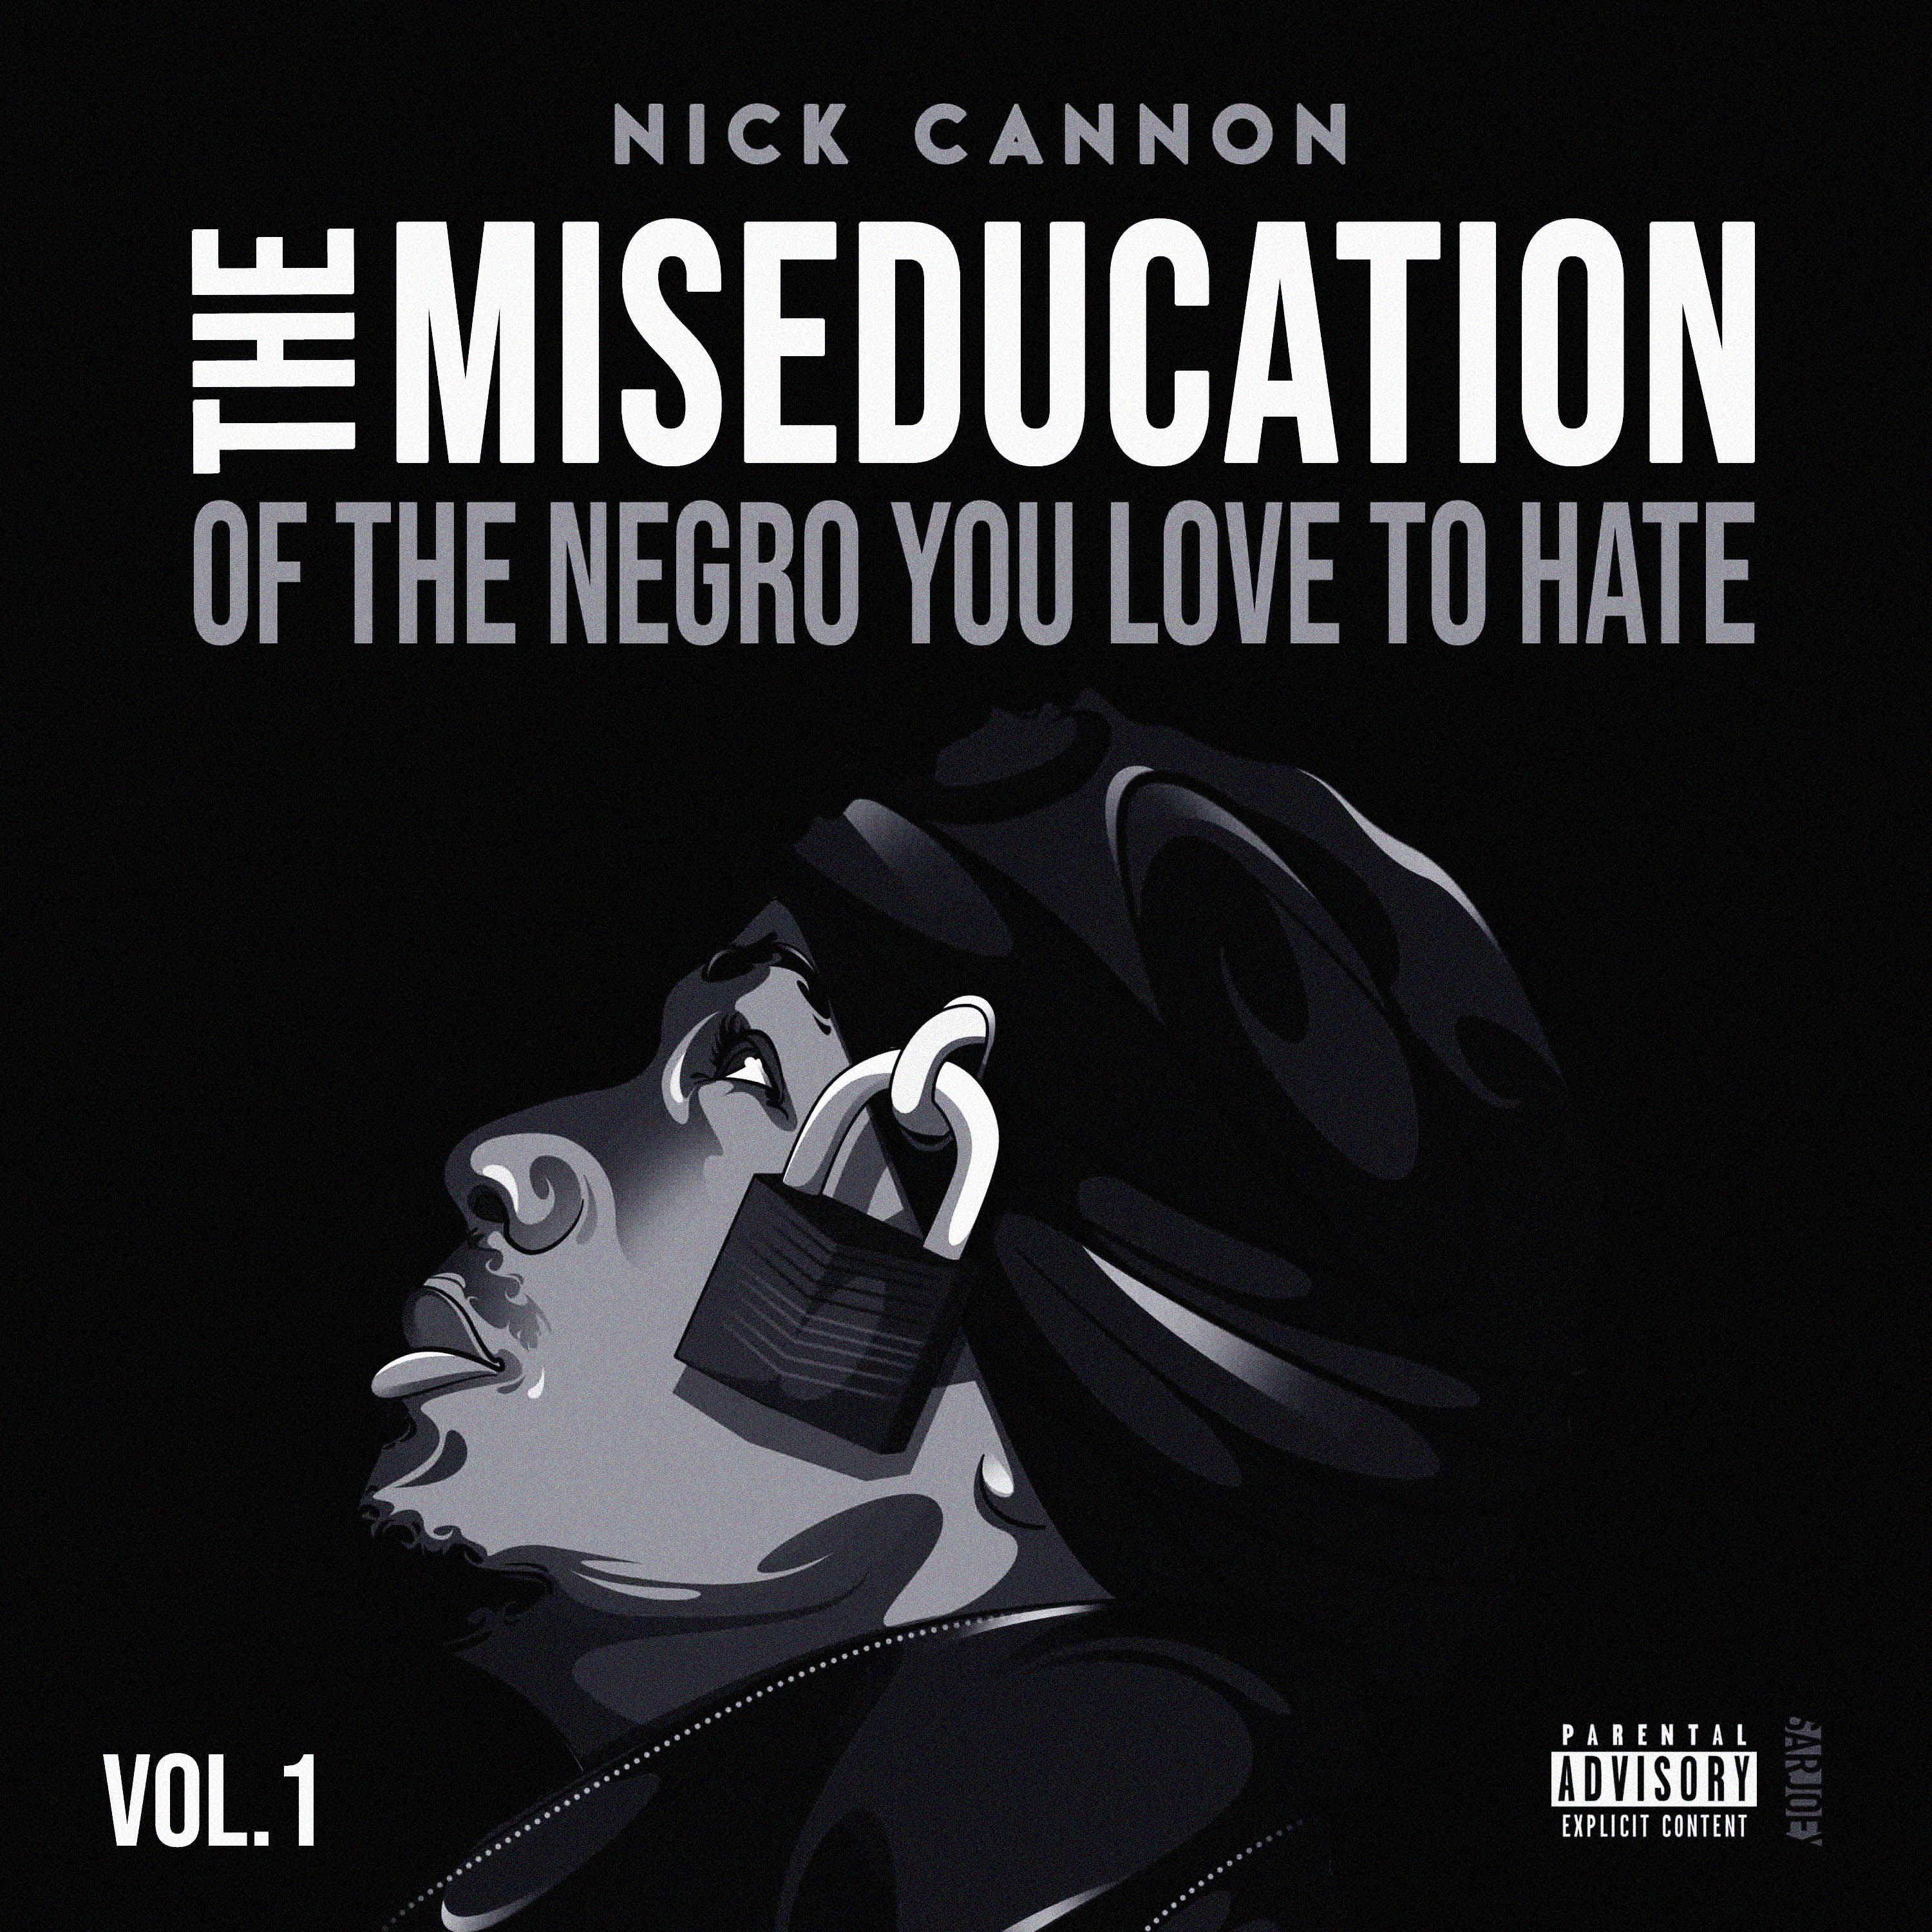 “THE MISEDUCATION OF THE NEGRO YOU LOVE TO HATE” IS OUT NOW!